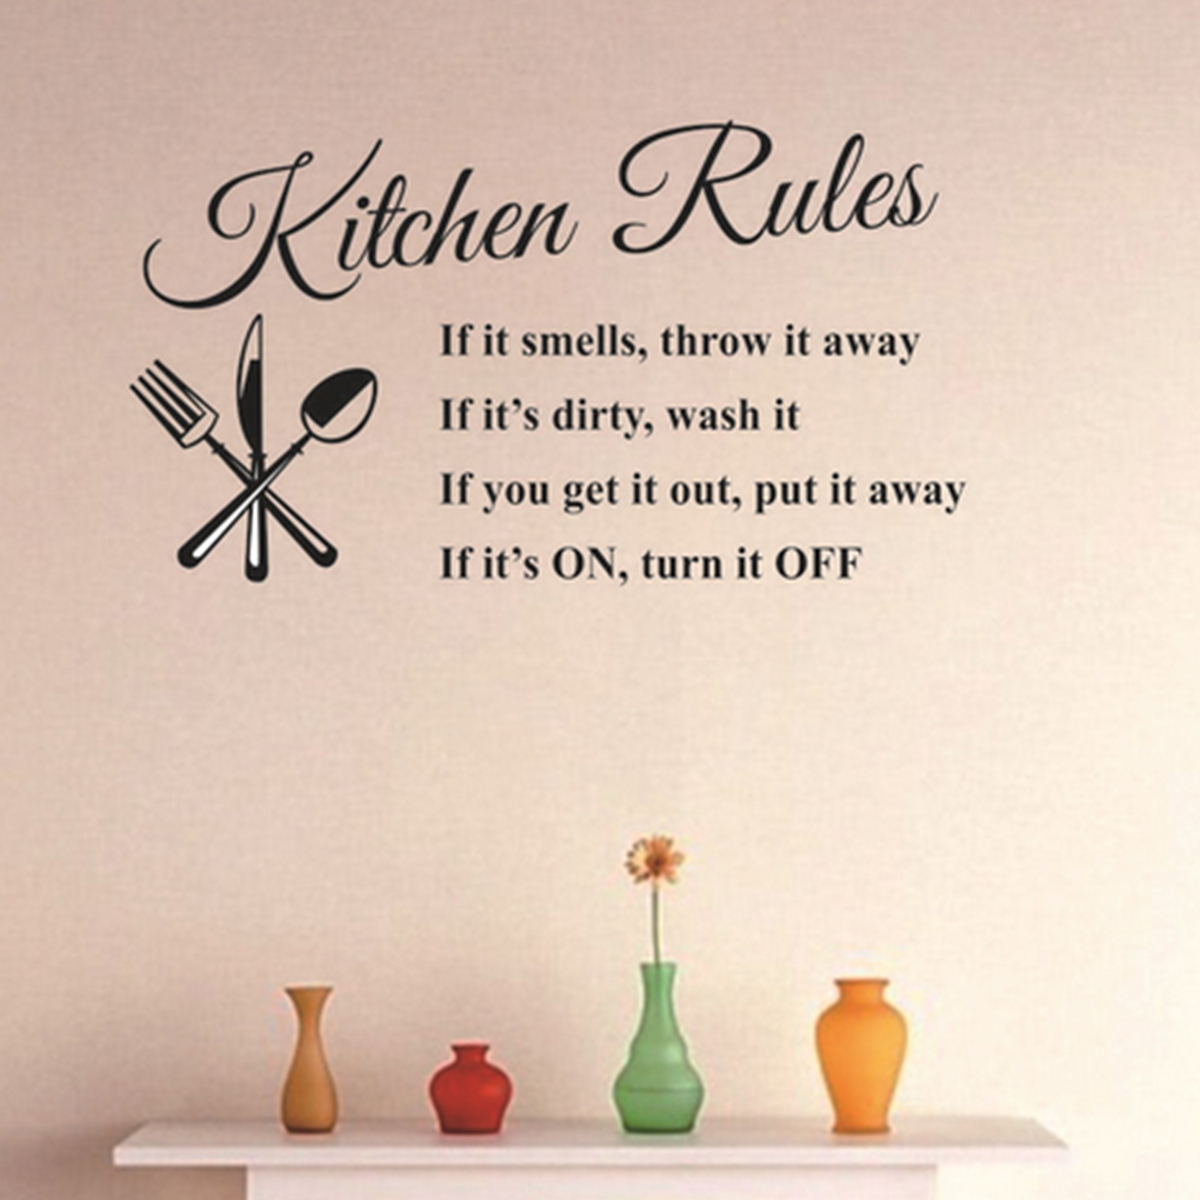 Find Kitchen Rules Wall Stickers Door Sign Vinyl DIY Wallpaper Wall Decal Home Restaurant Kitchen Wall Decor for Sale on Gipsybee.com with cryptocurrencies